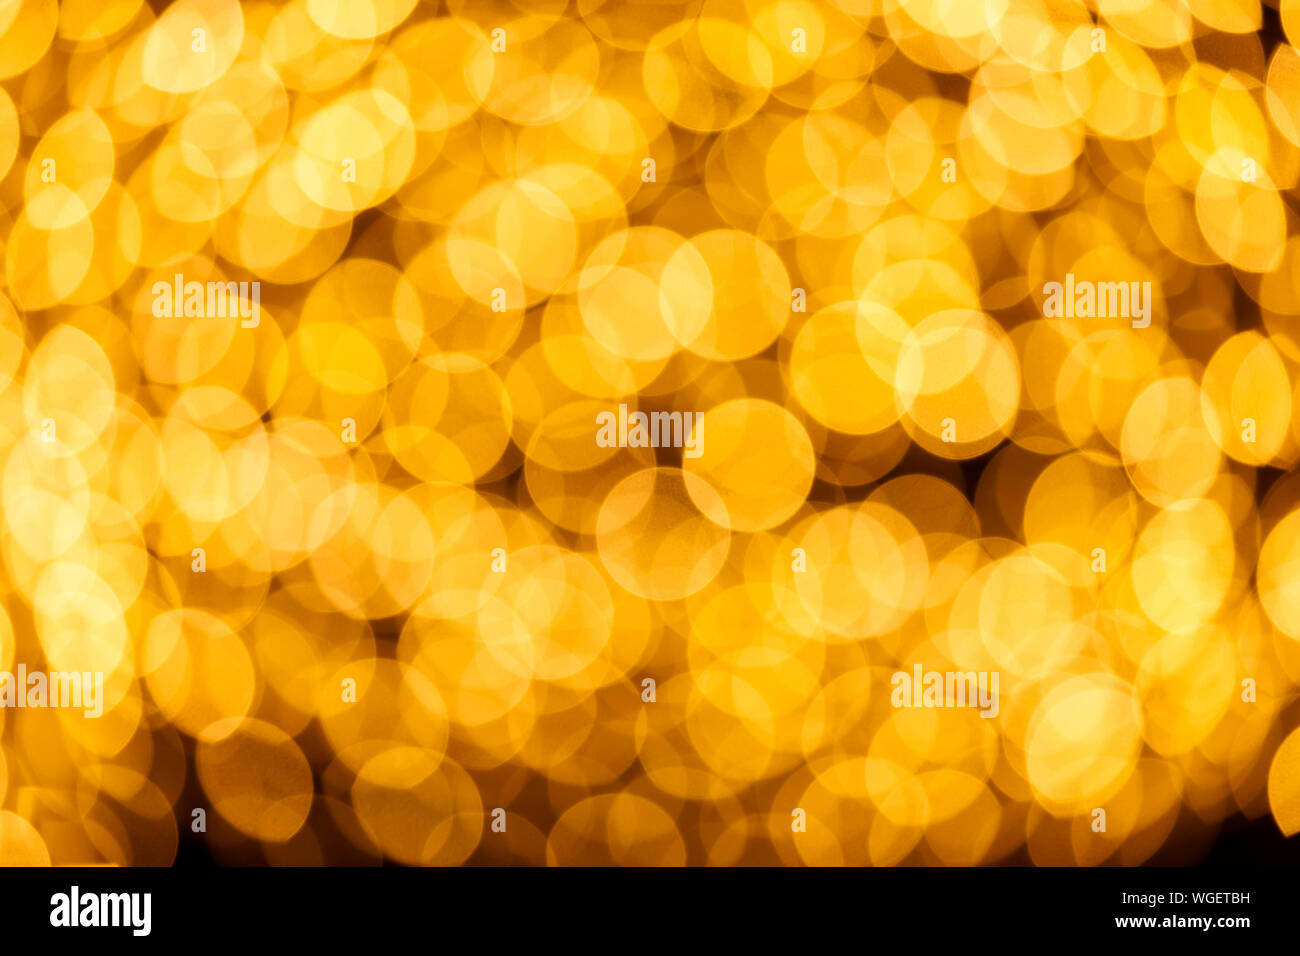 Abstract background with bokeh or blurry round colorful light bubbles Stock Photo